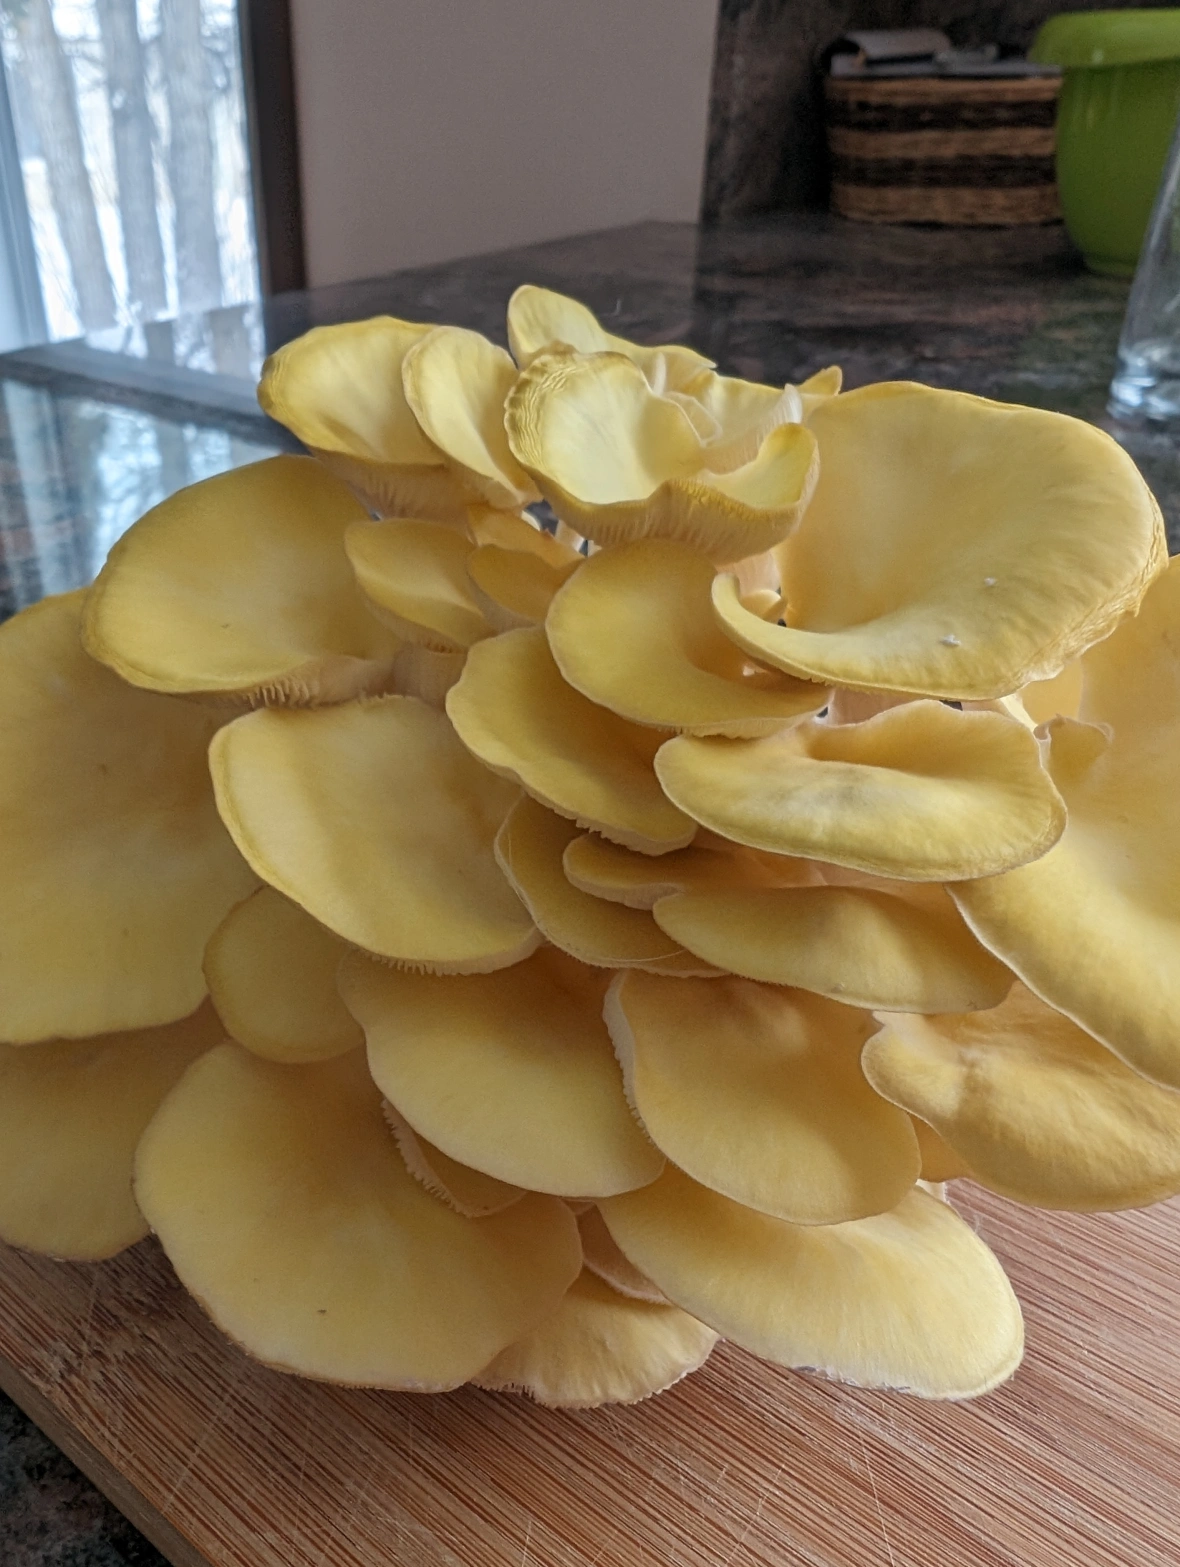 Wow, yellow oyster mushrooms sure grow fast! 🍄